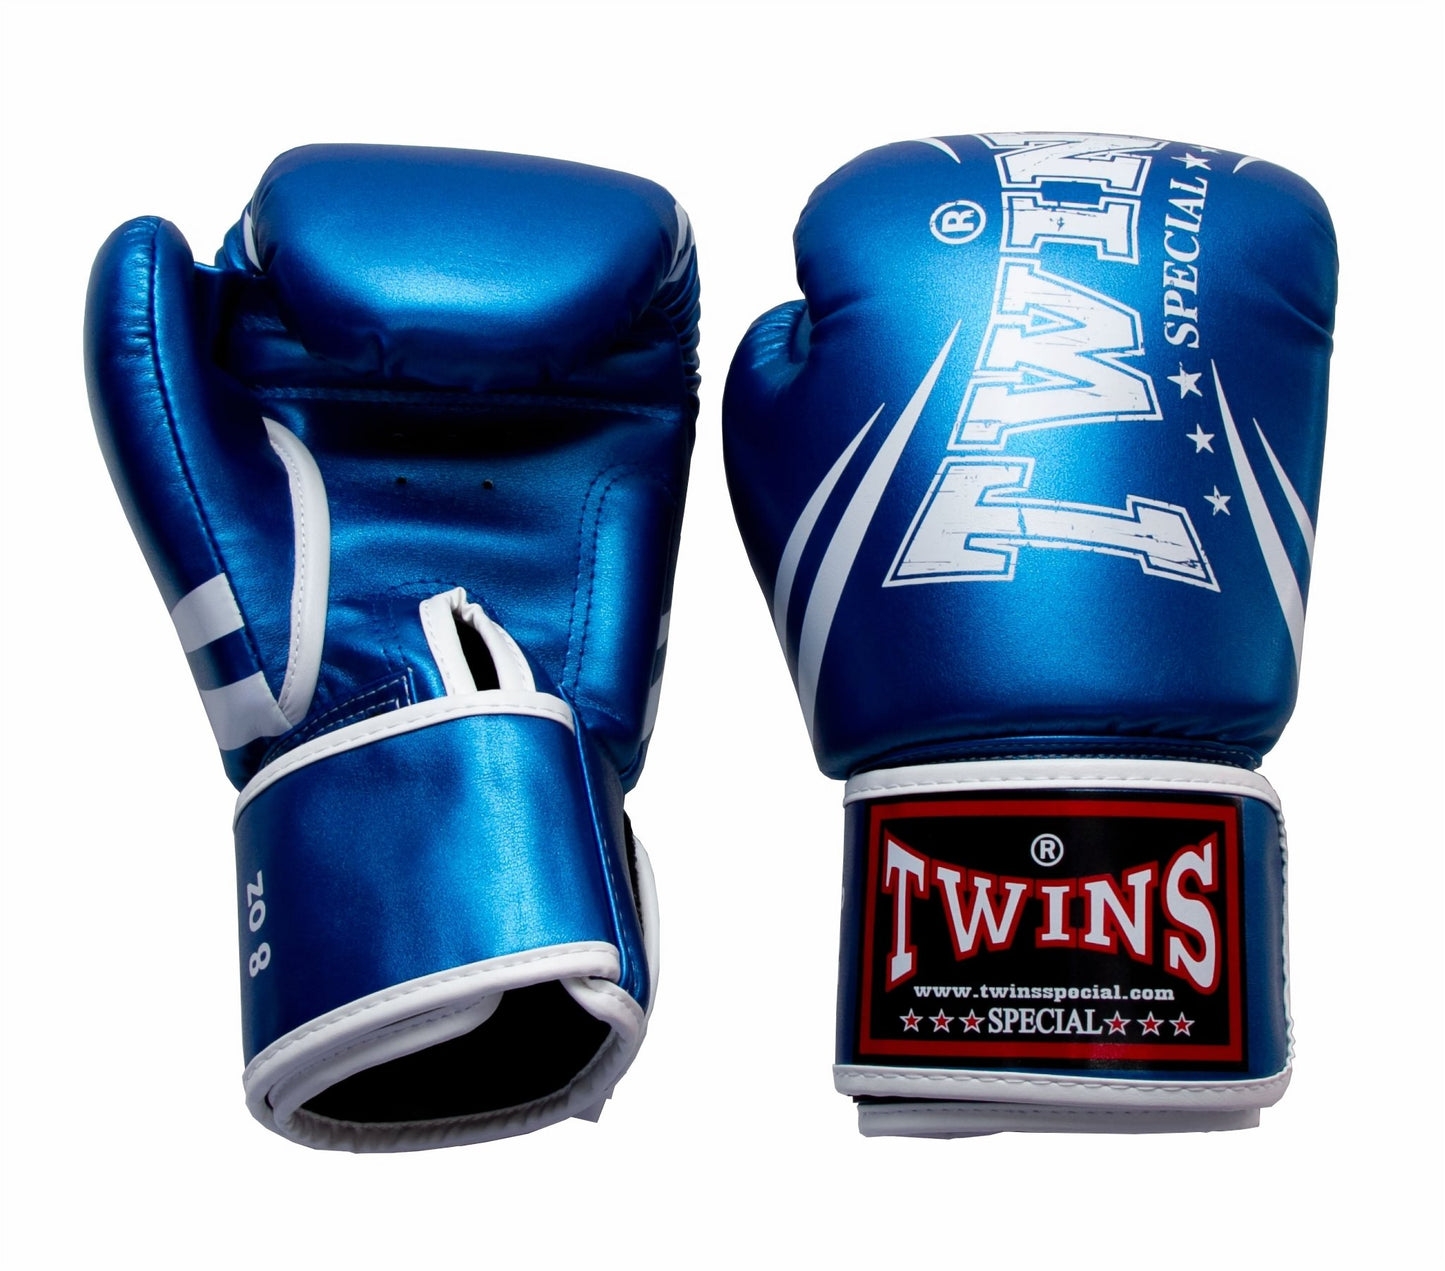 Twins Special BOXING GLOVES FBGVS3-TW6 METALLIC BLUE